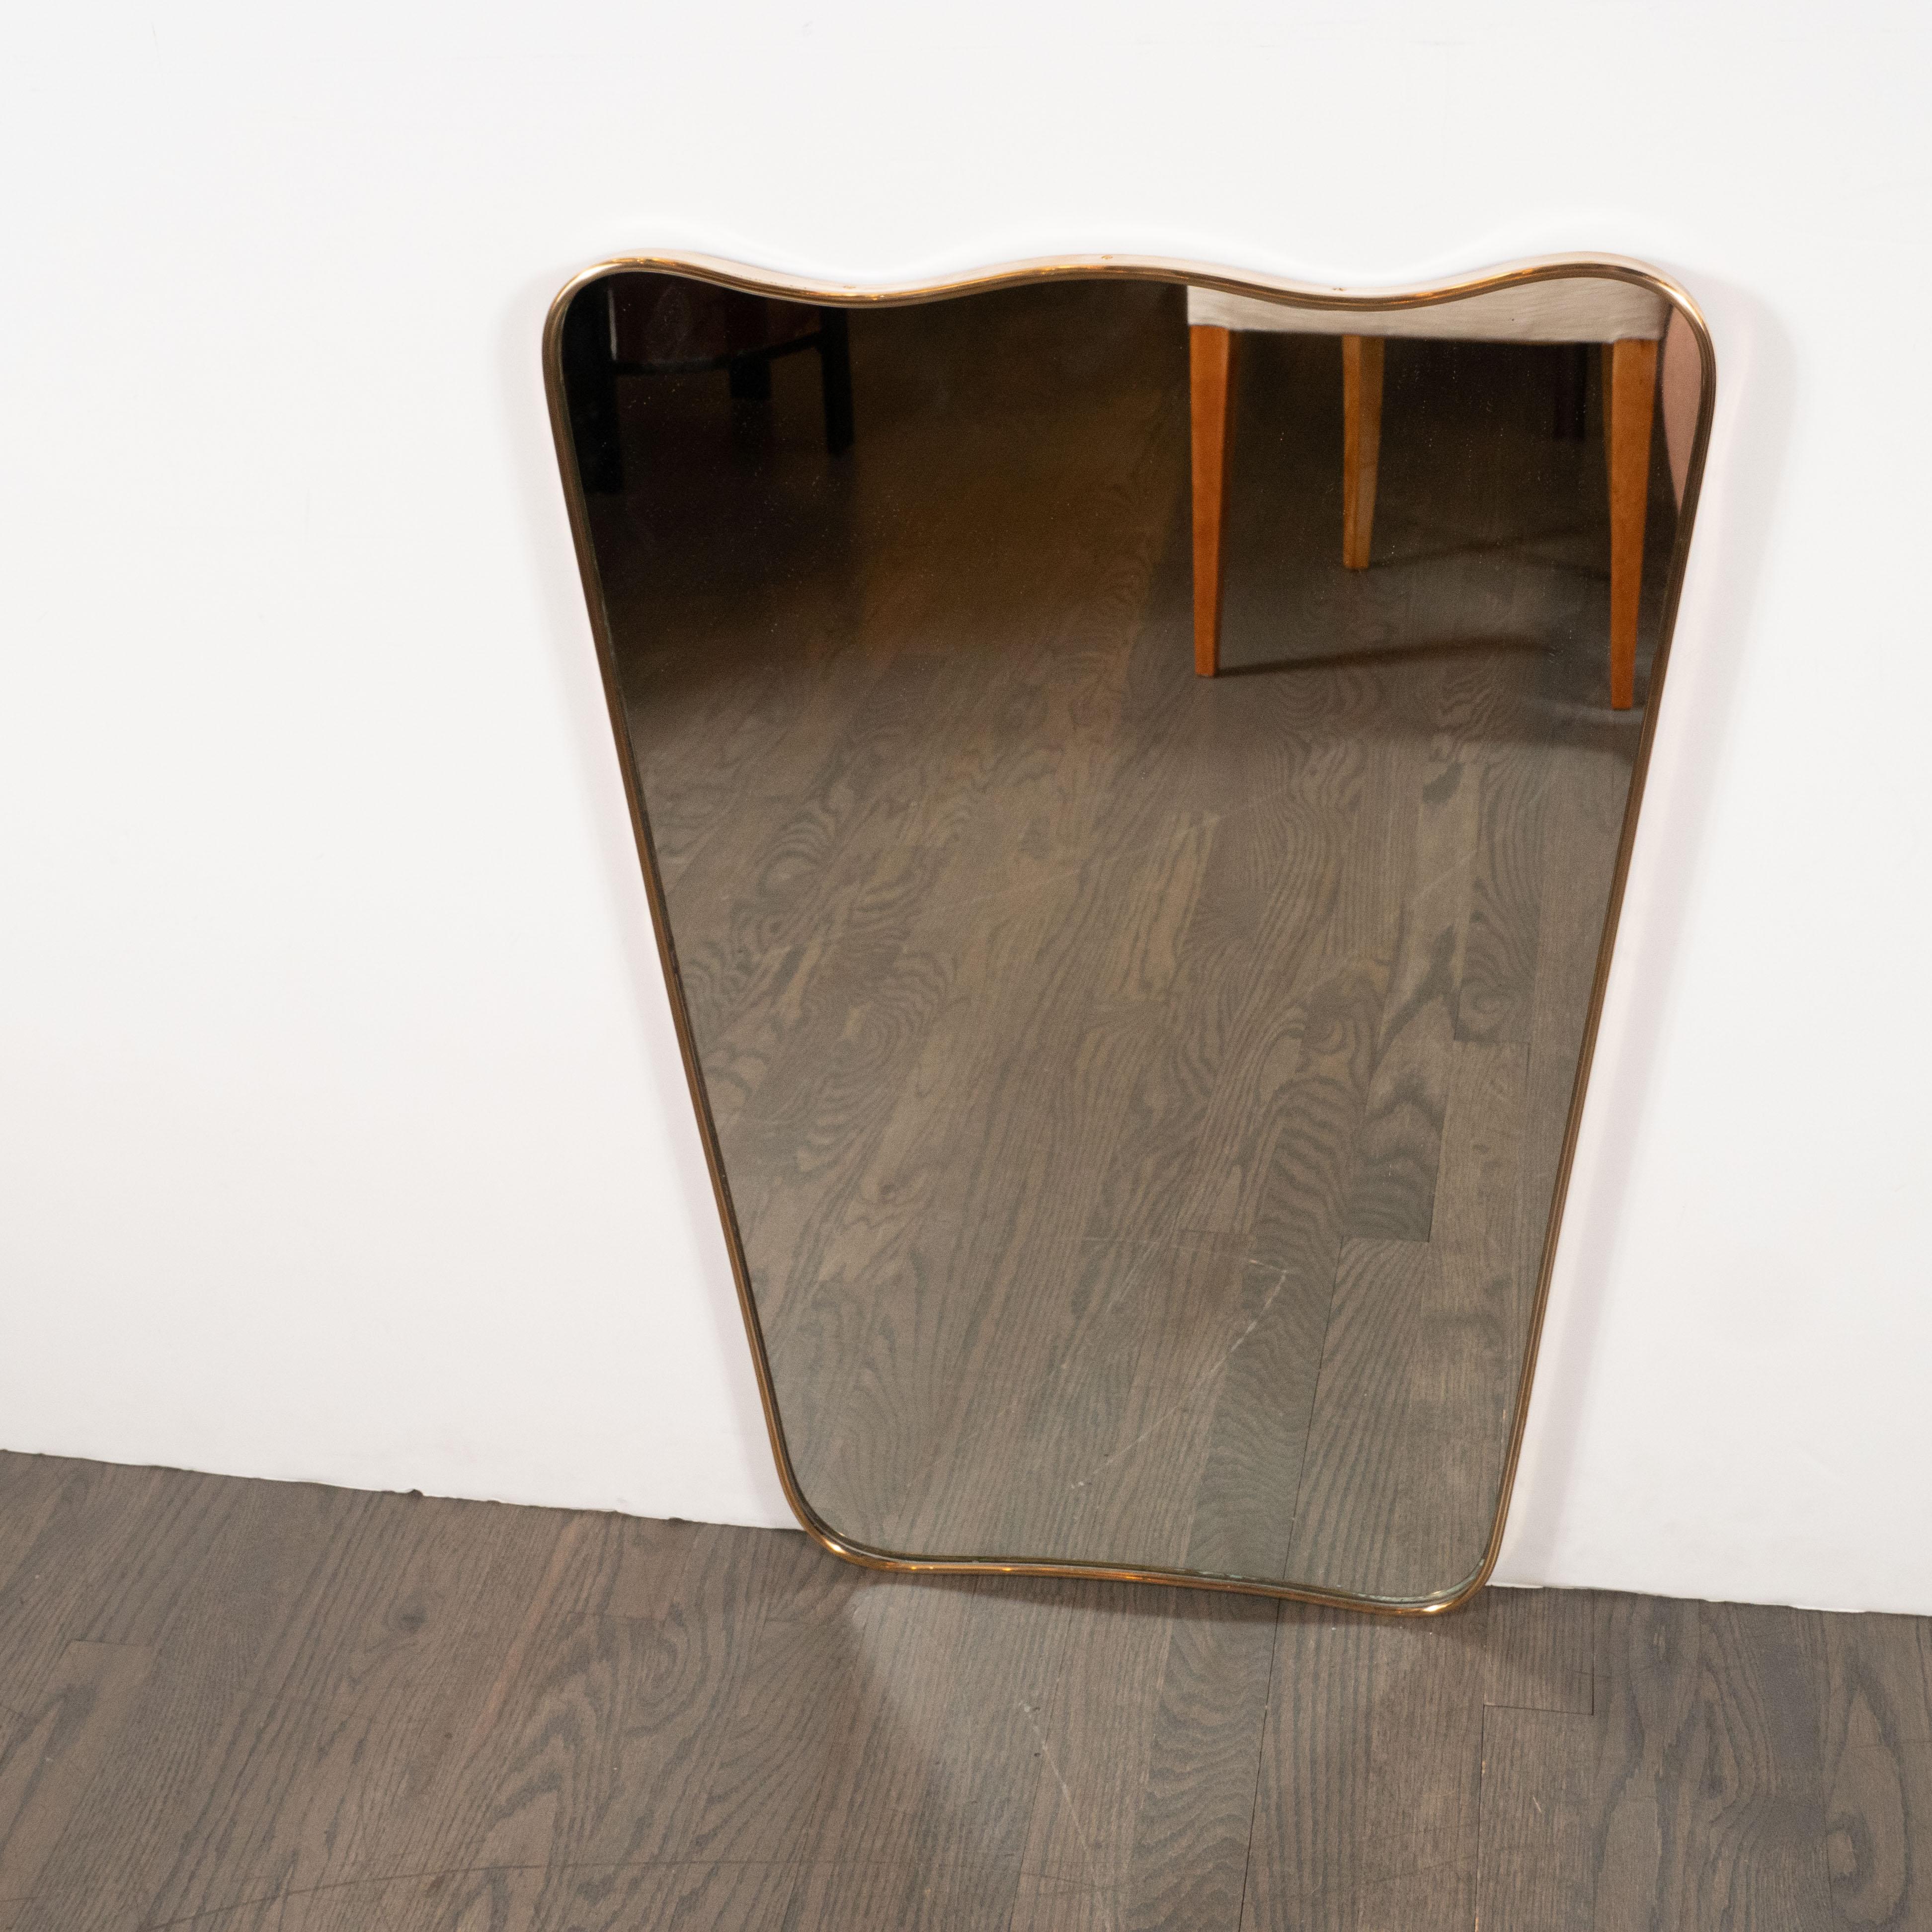 This stunning Mid-Century Modern shield mirror was realized in Italy, circa 1950. It features a tapered rectangular body wrapped in brass with an undulating scalloped top. Austere, refined and full of subtle dynamism, this piece embodies the